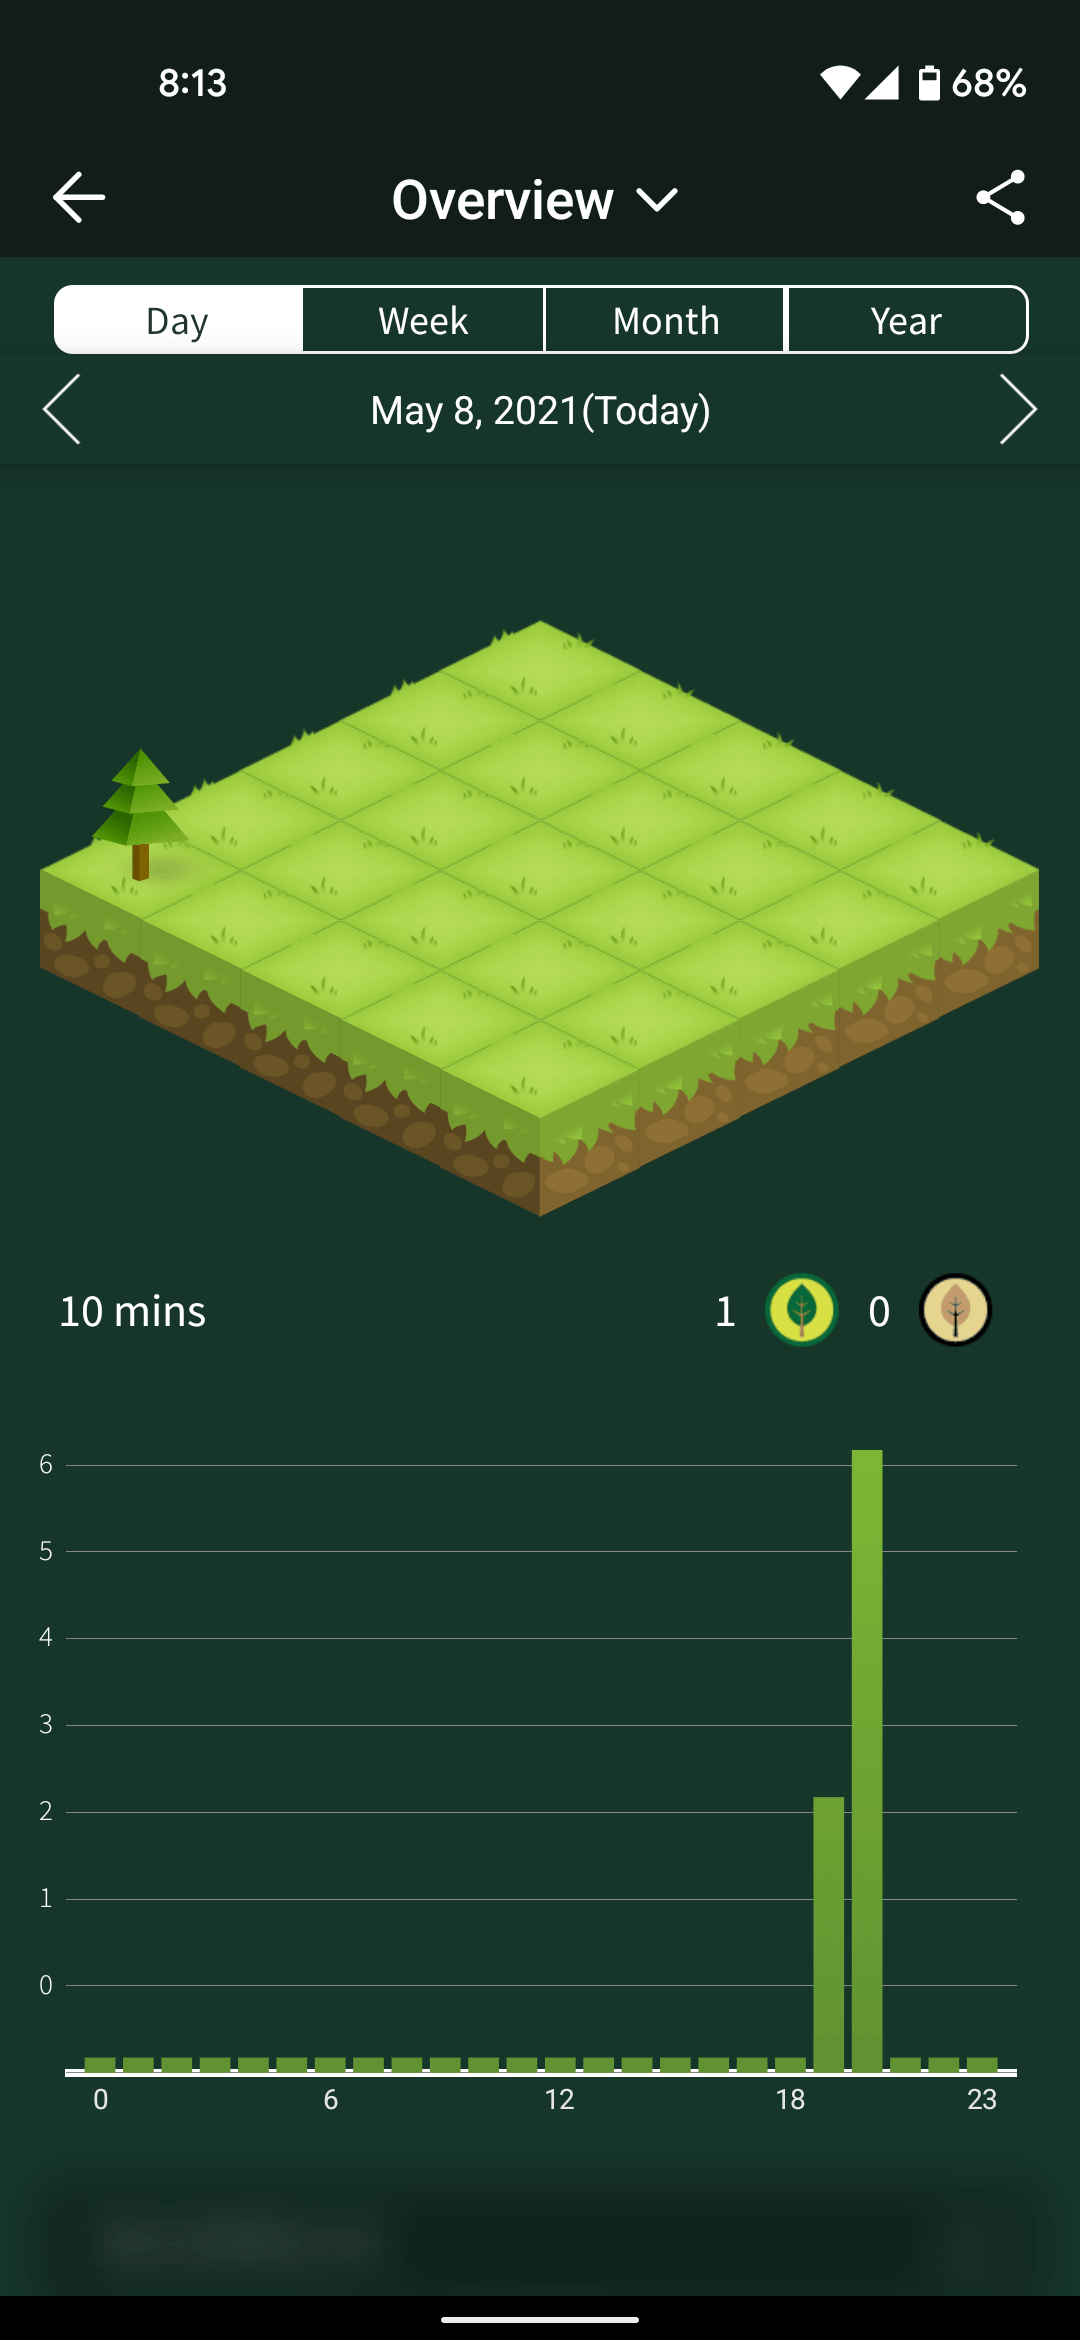 Overview of Tress planted in the Forest app